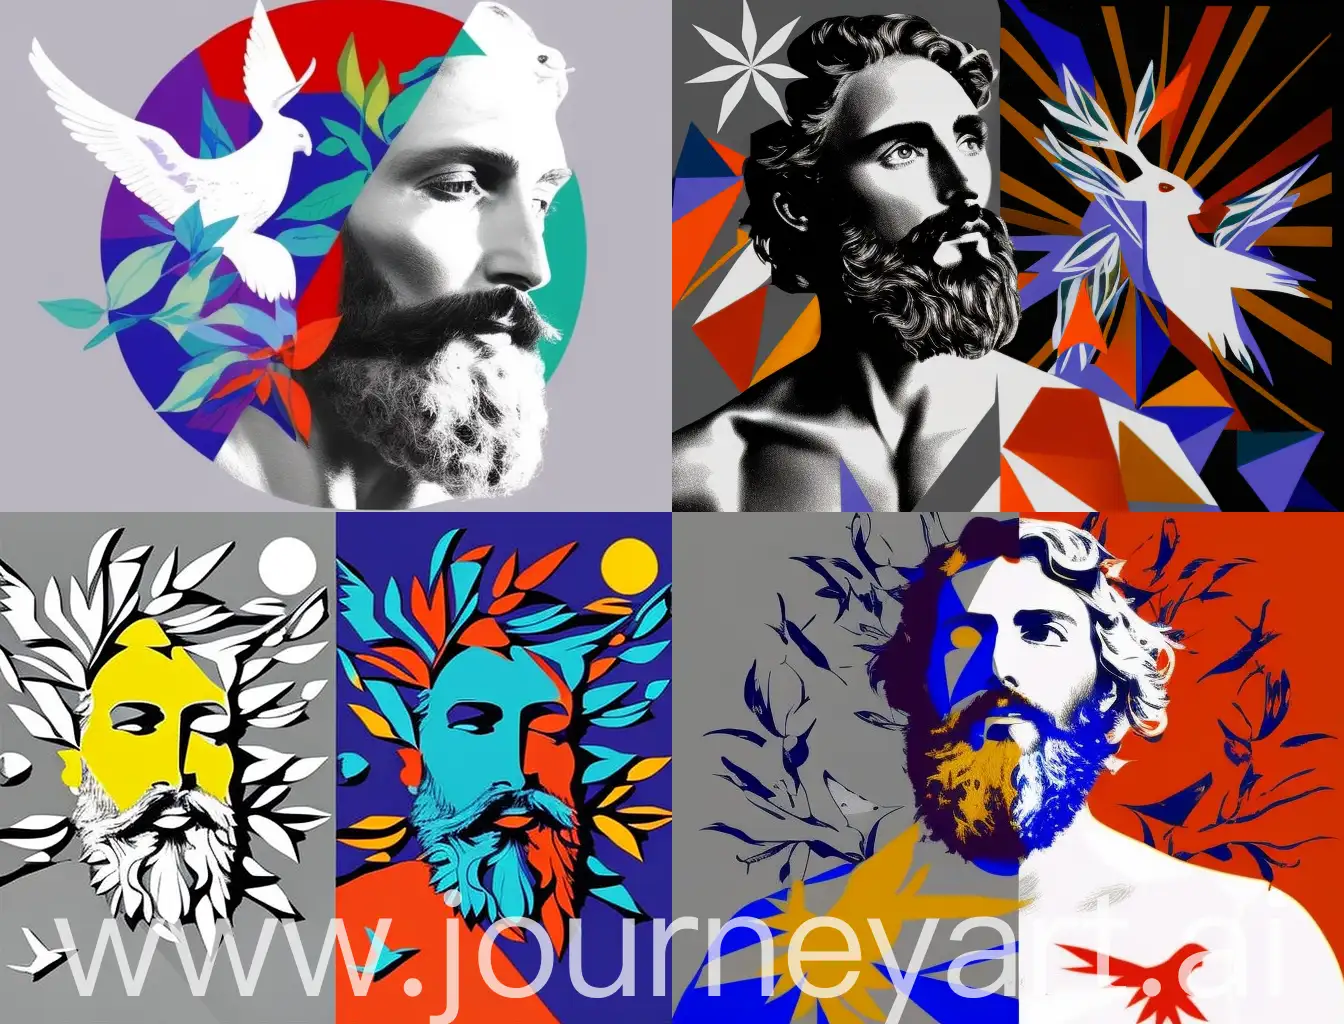 Colorful-Jean-Cocteau-Inspired-Art-with-Bearded-Men-Olive-Branches-Dove-Star-and-Sun